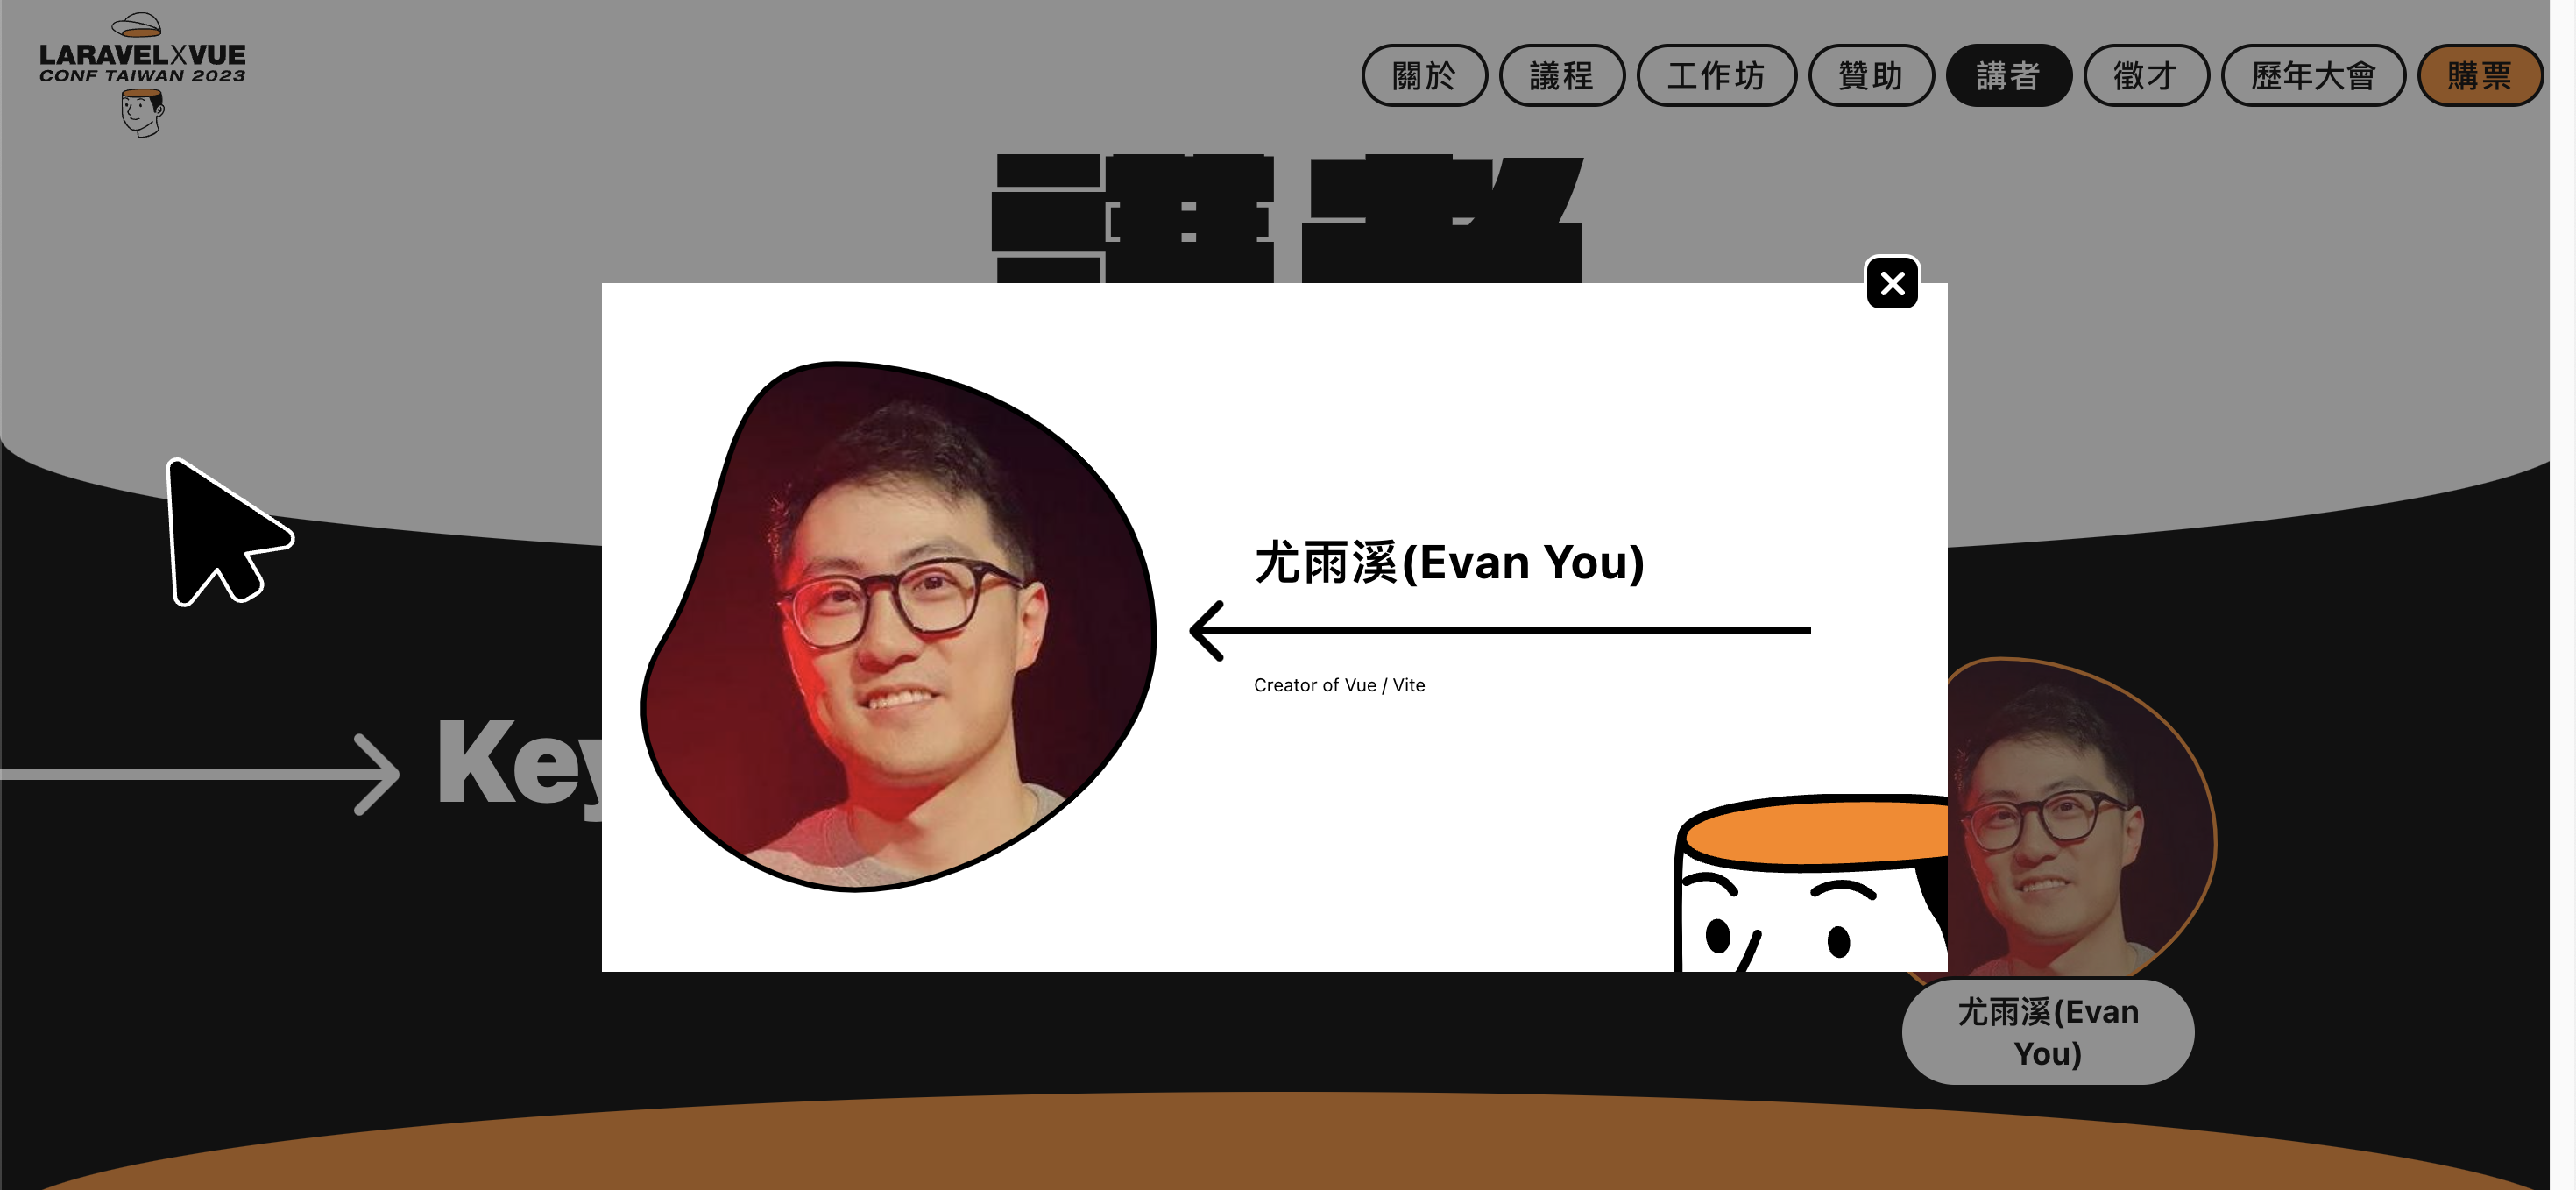 Evan You was treated with high regard by the organizers during his invited visit to Taiwan. Screenshot from LaravelConf Taiwan 2023.